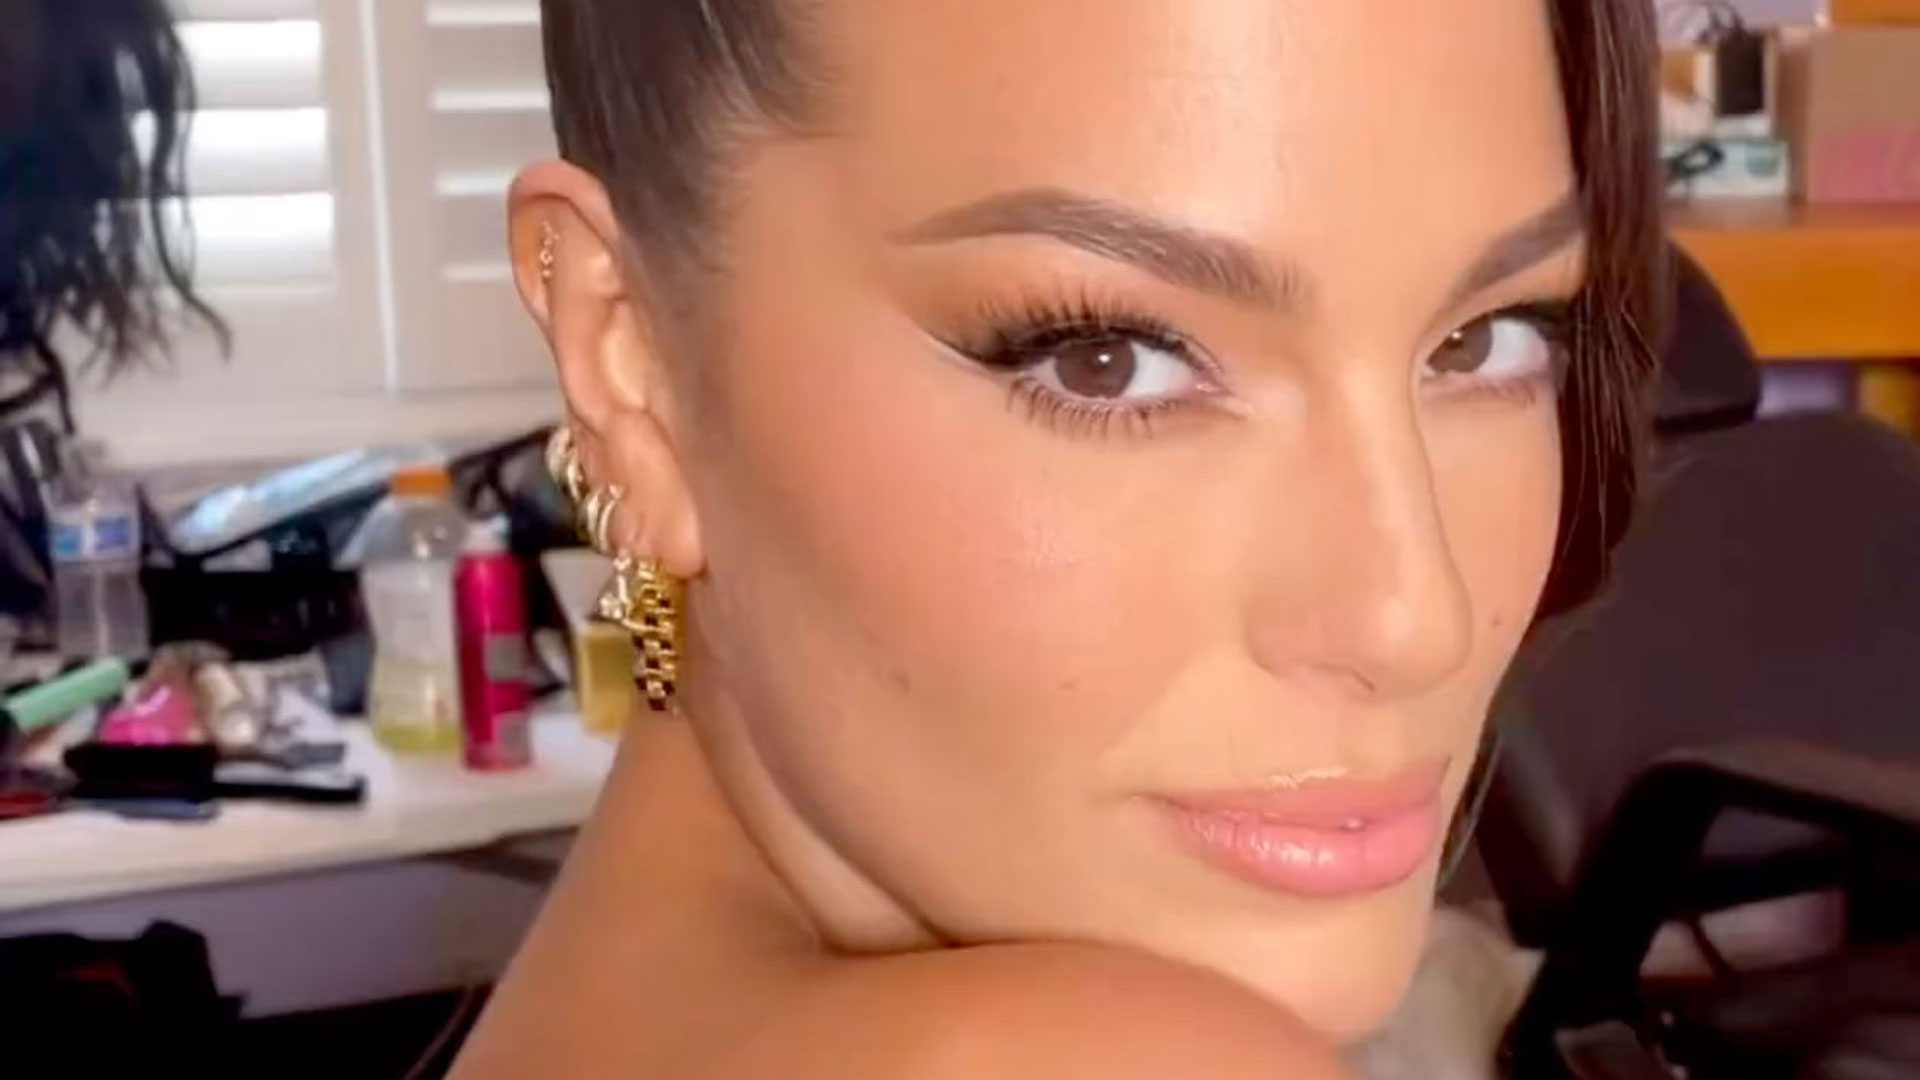 World’s Sexiest Woman Ashley Graham shares sizzling close-up video of her deep cleavage in strapless dress in glam room